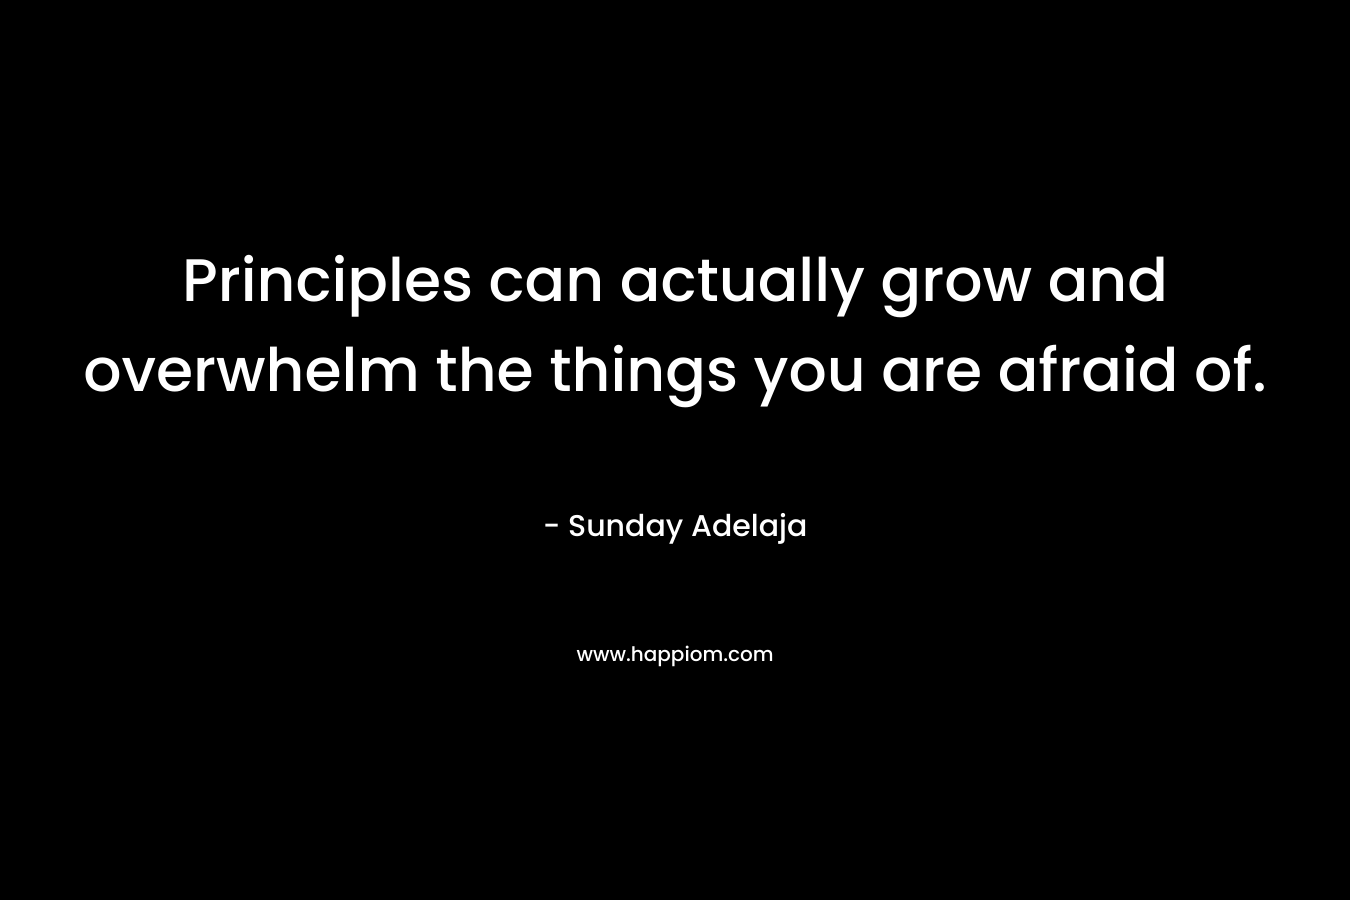 Principles can actually grow and overwhelm the things you are afraid of.